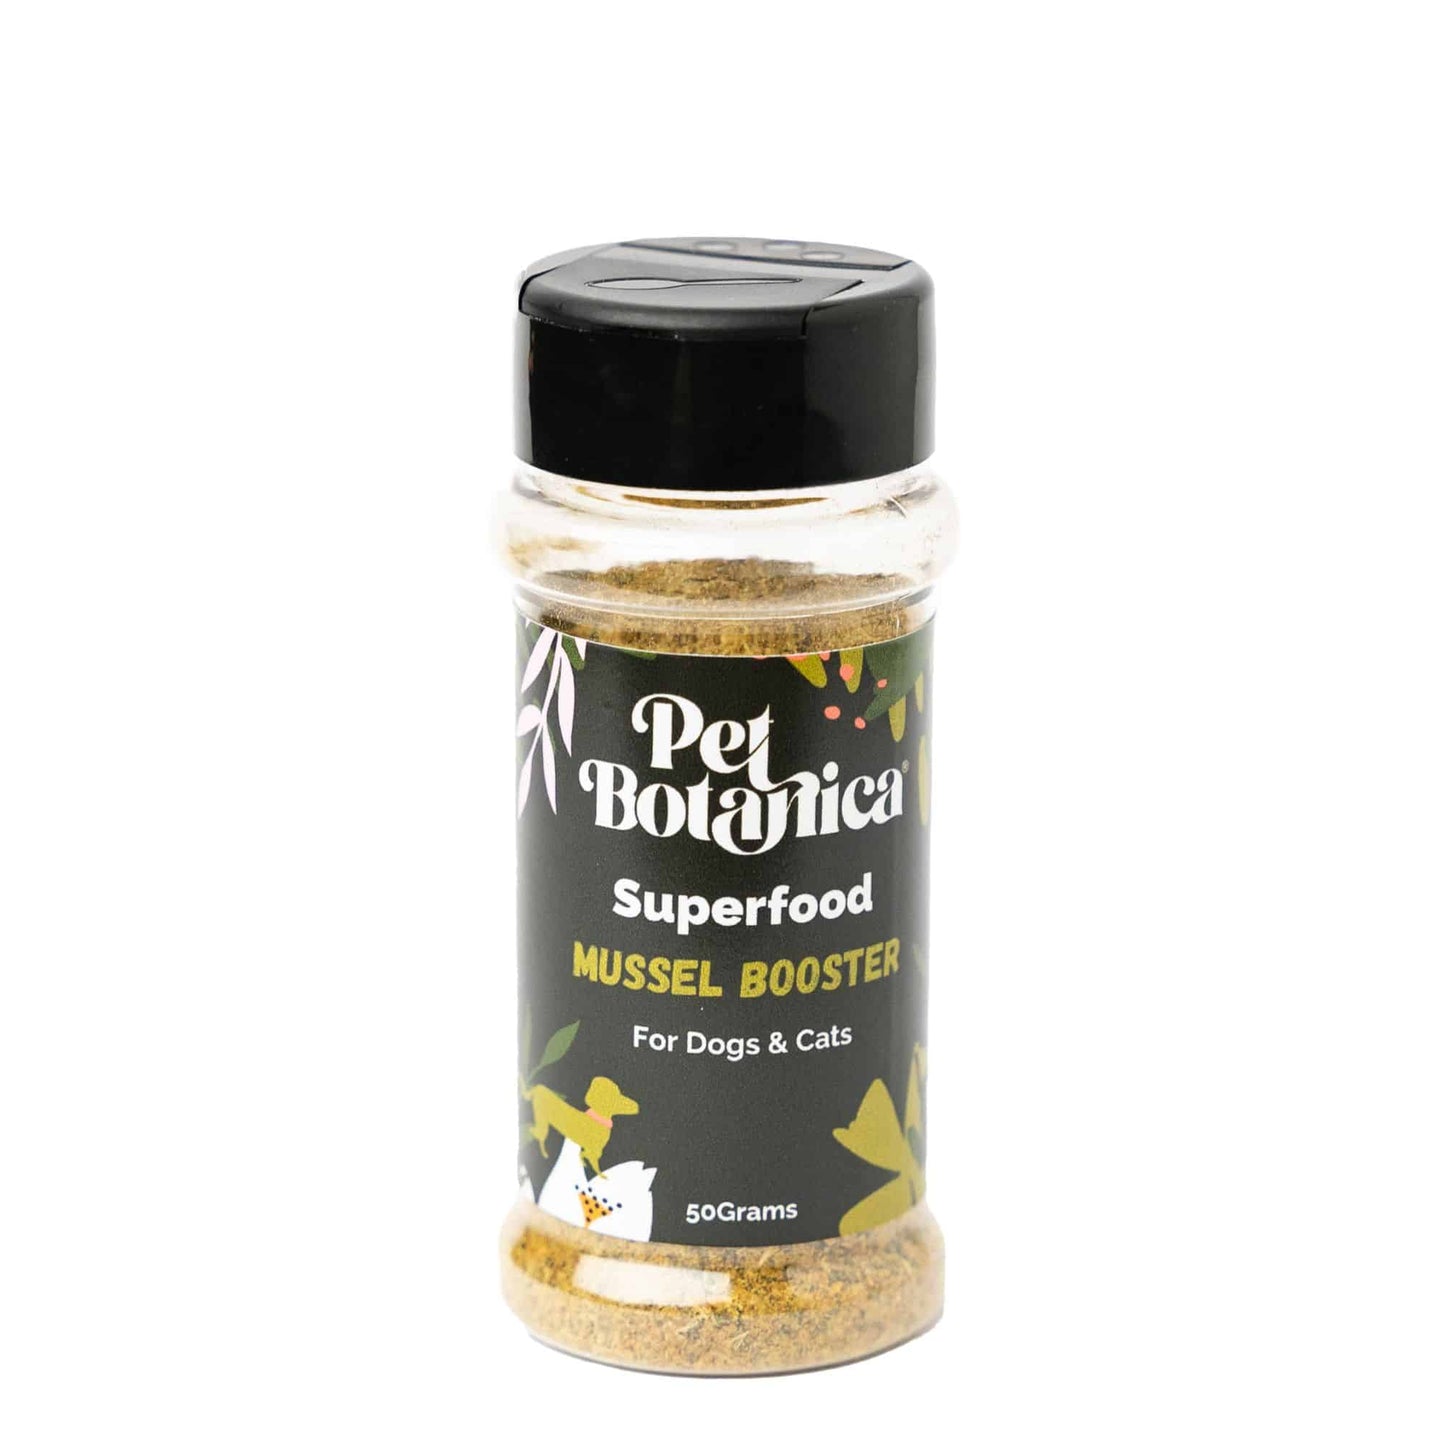 Pet Botanica Superfood Mussel Booster